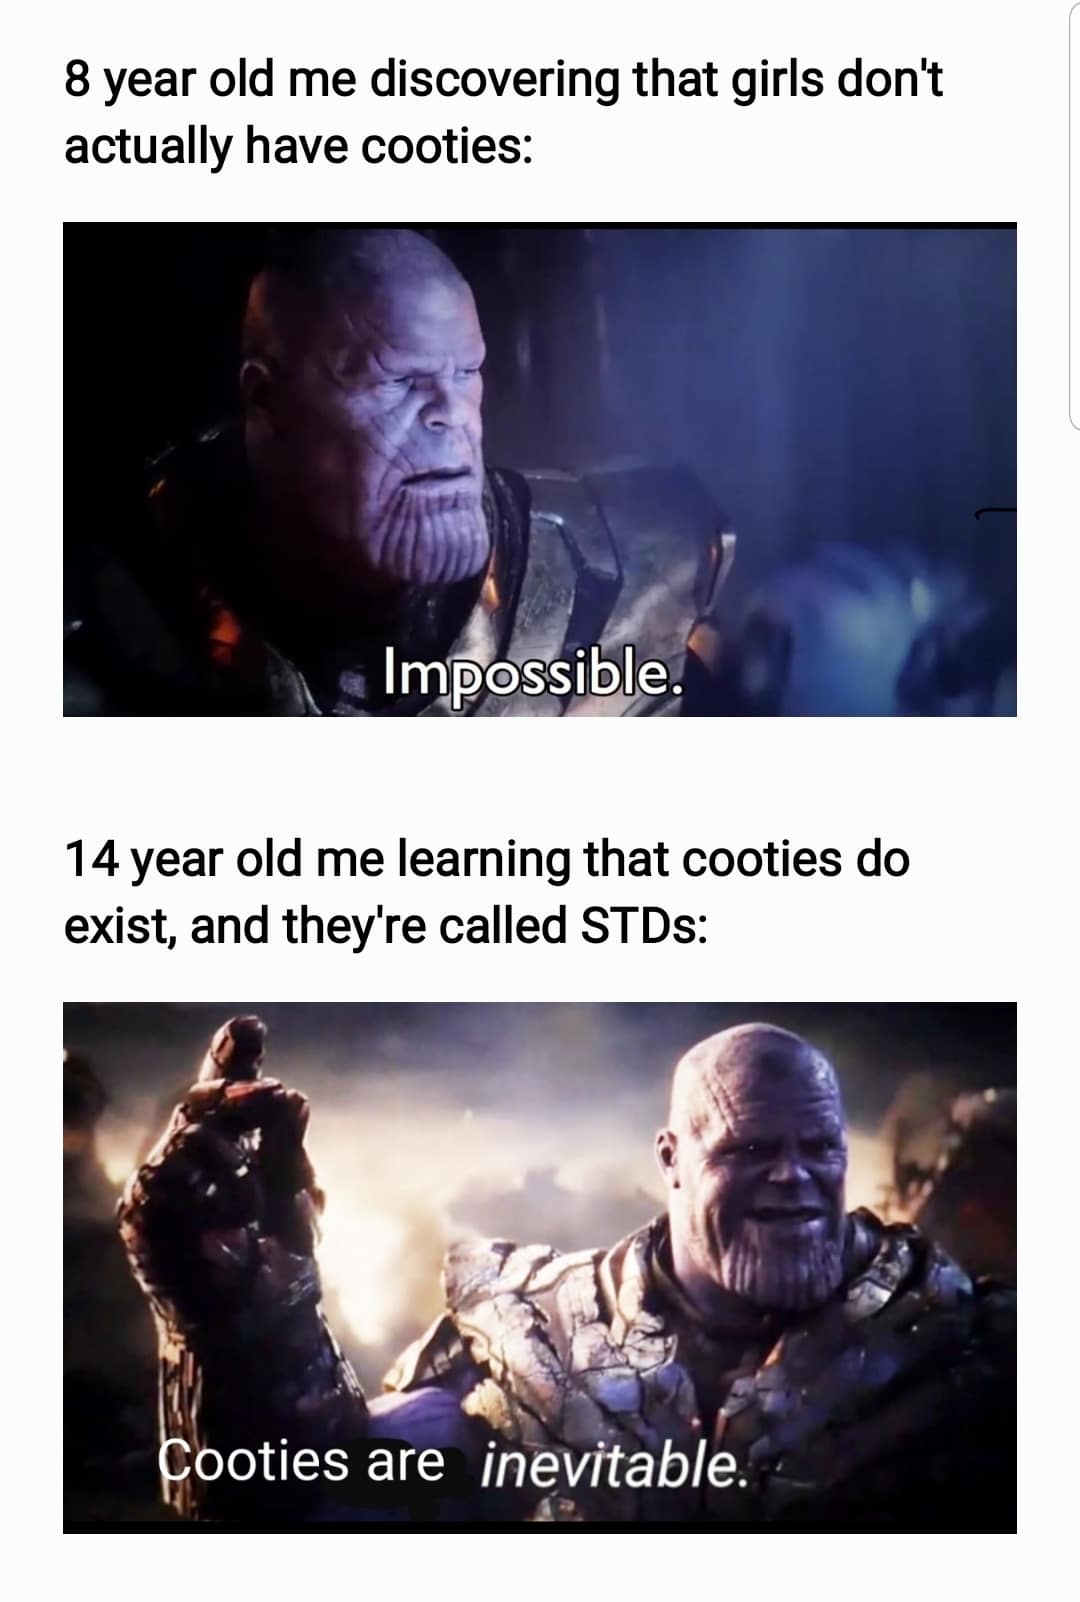 thanos avengers-memes thanos text: 8 year old me discovering that girls don't actually have cooties: ImpossiÅle: 14 year old me learning that cooties do exist, and they're called STDs: fii' oties are inevitable. 